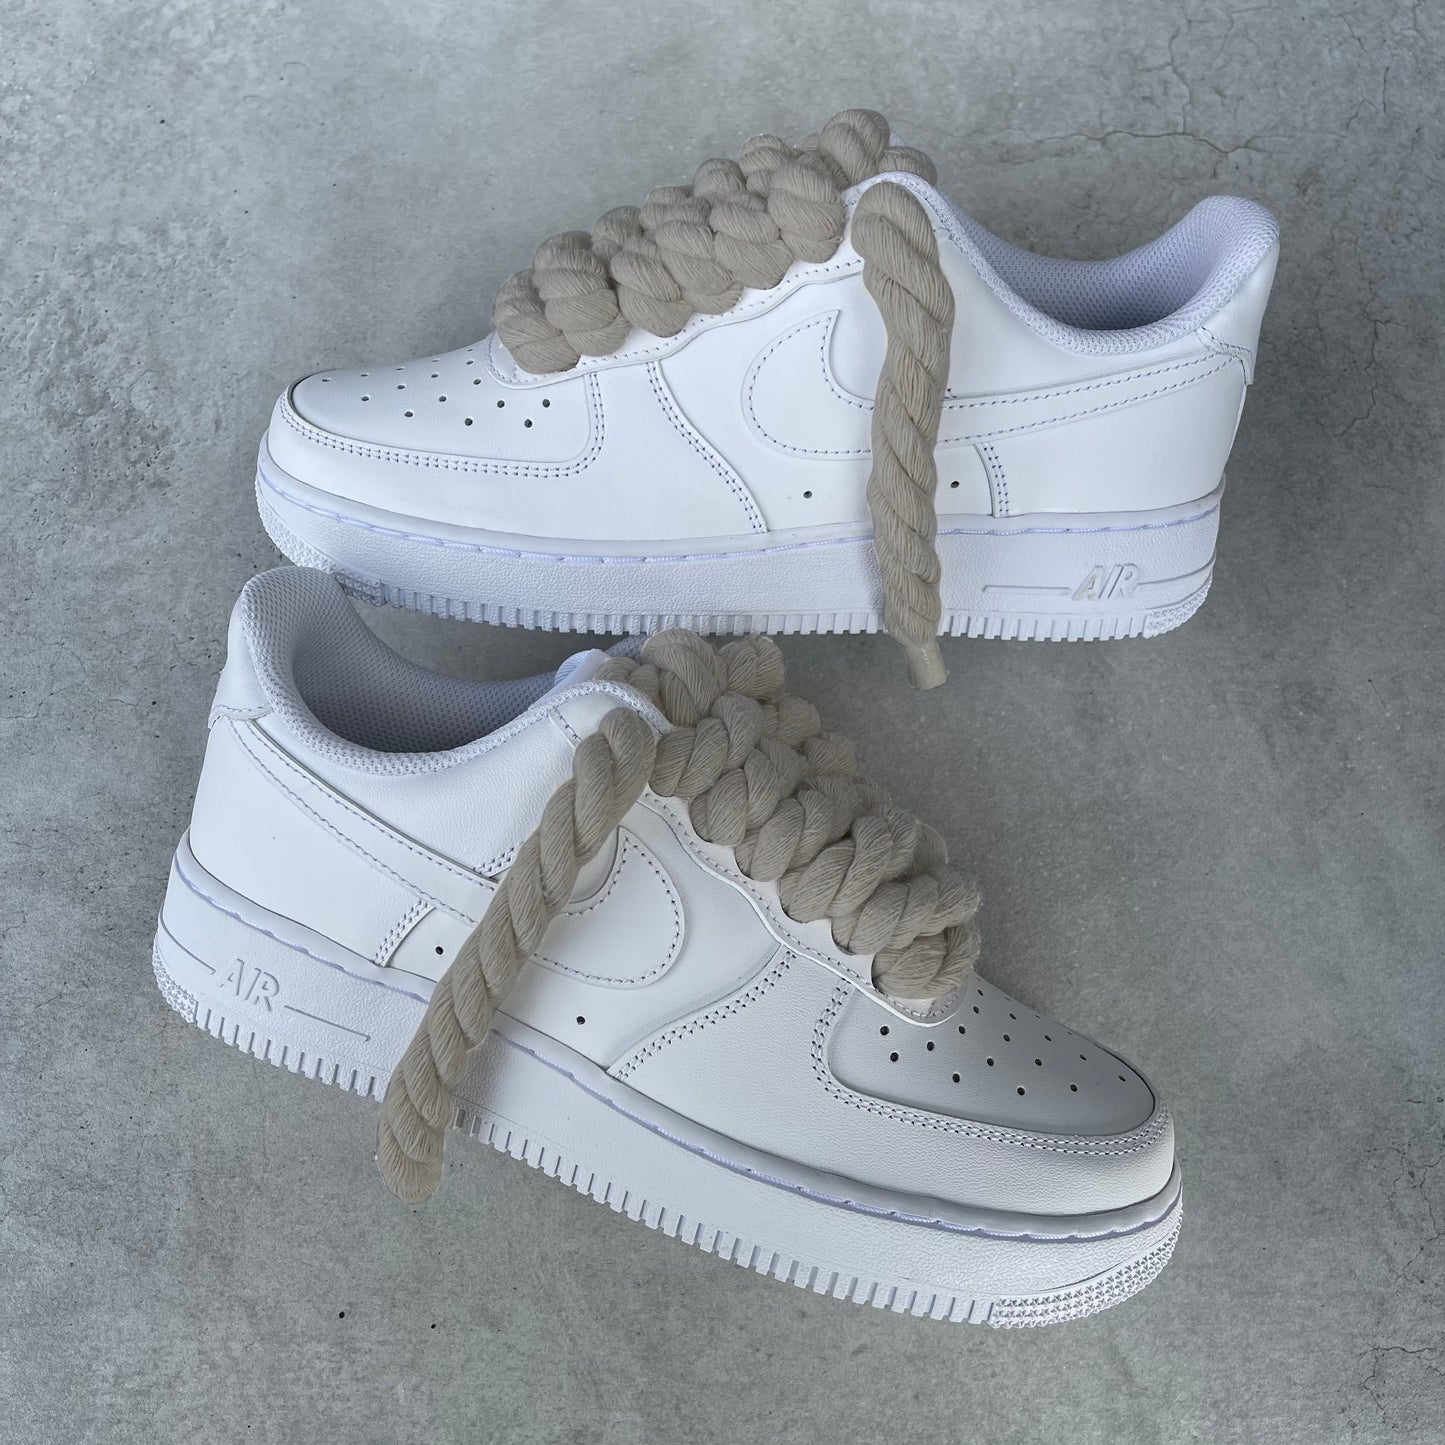 Custom AIR FORCE 1 - Rope laces (grey)